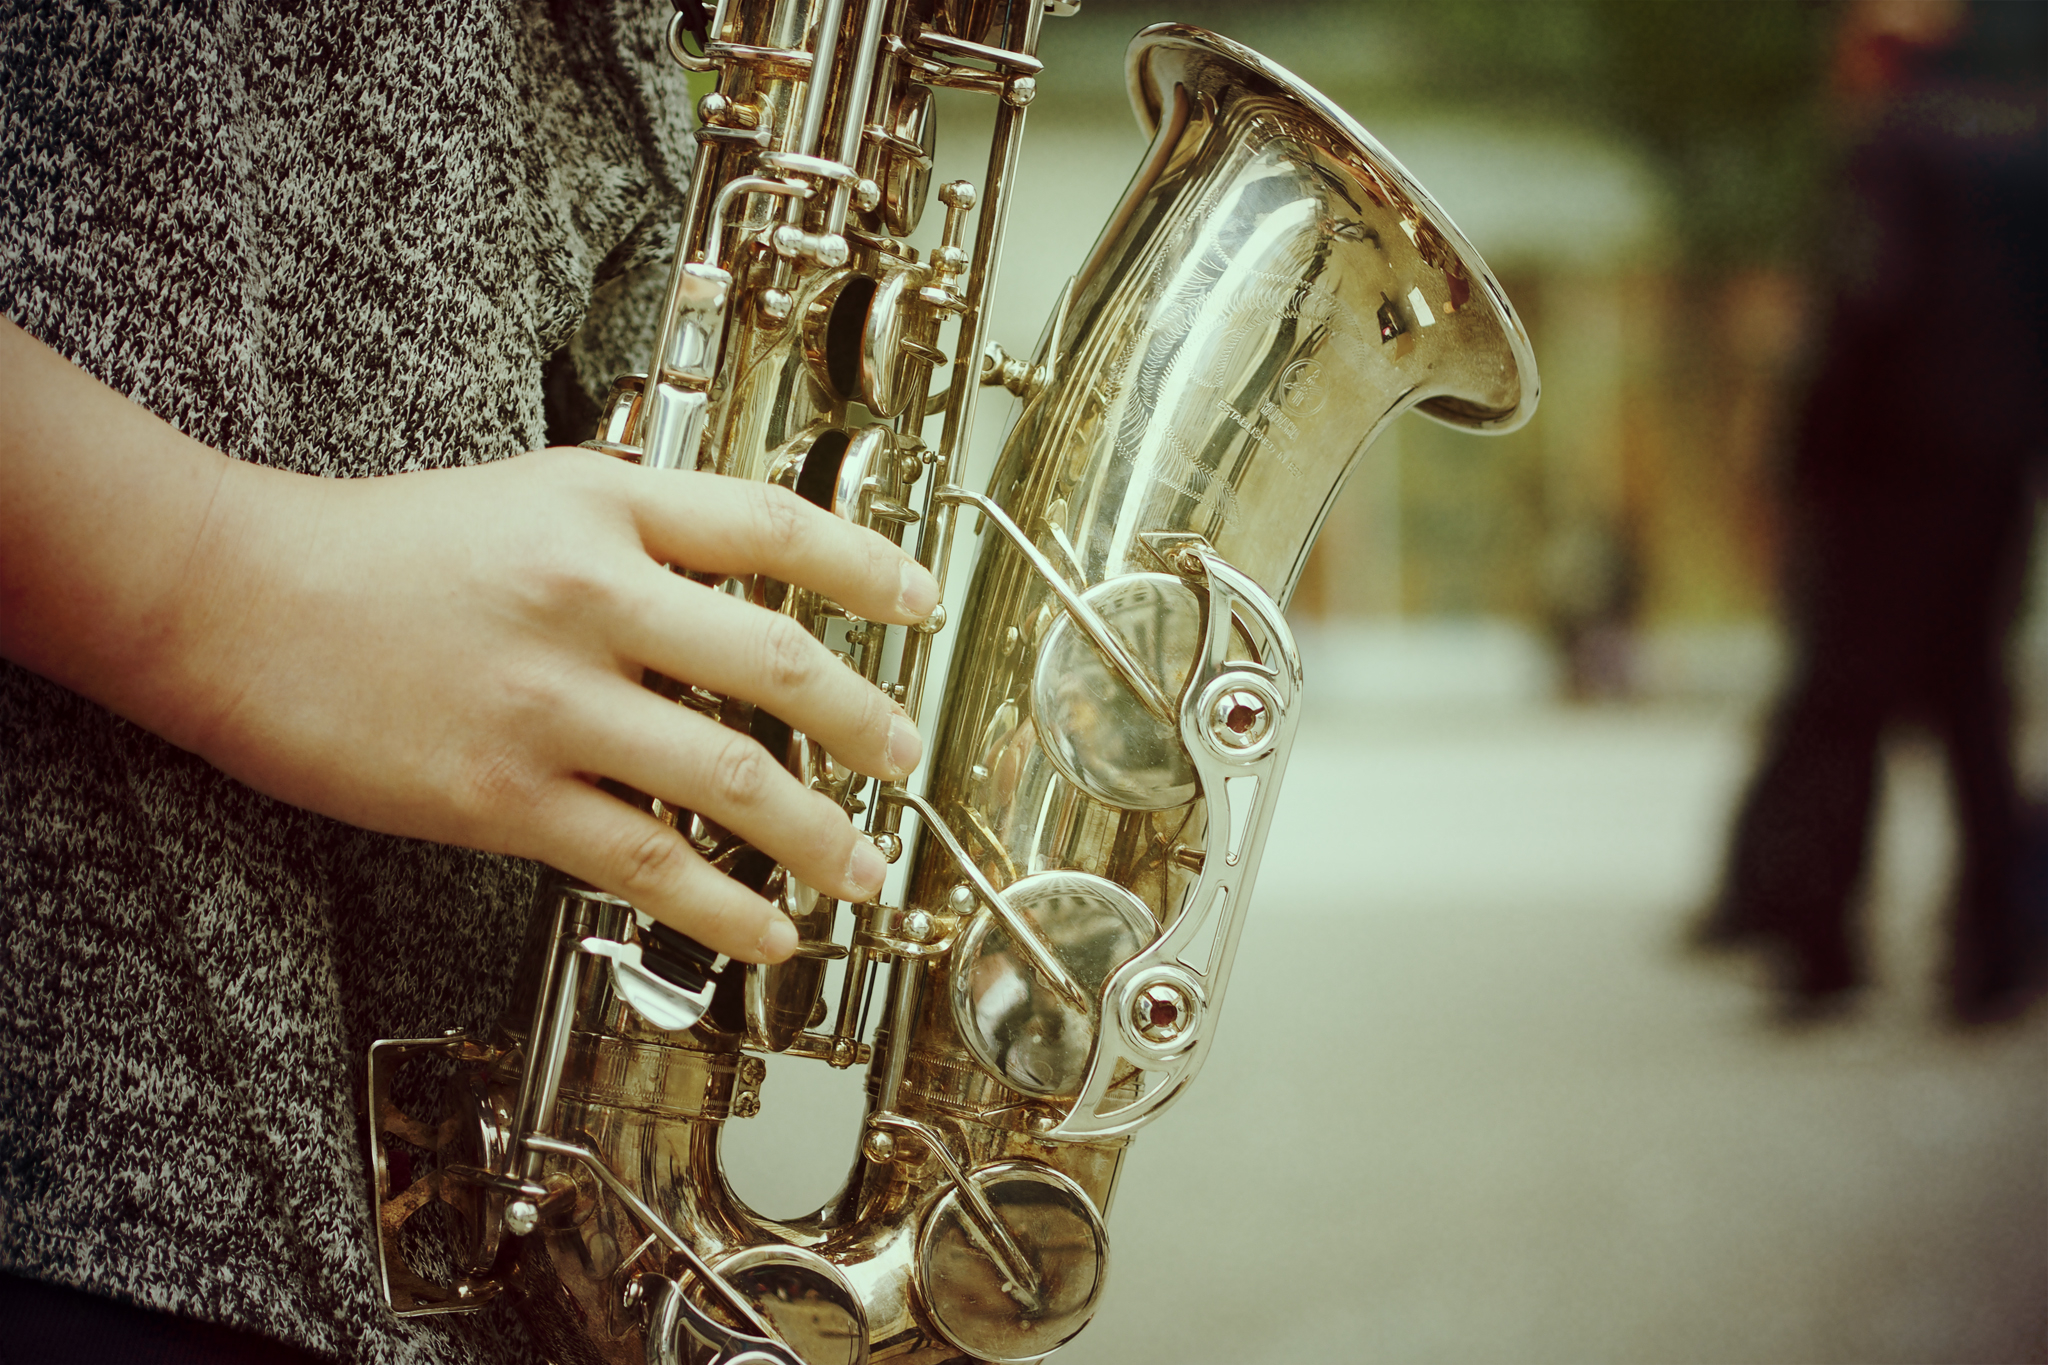 2048x1365 Wallpaper : musical instrument, woodwind instrument, saxophonist, wind instrument, baritone saxophone, string instrument, clarinet family, reed instrument, brass instrument, hand, music, mellophone, horn 886825 HD Wallpapers